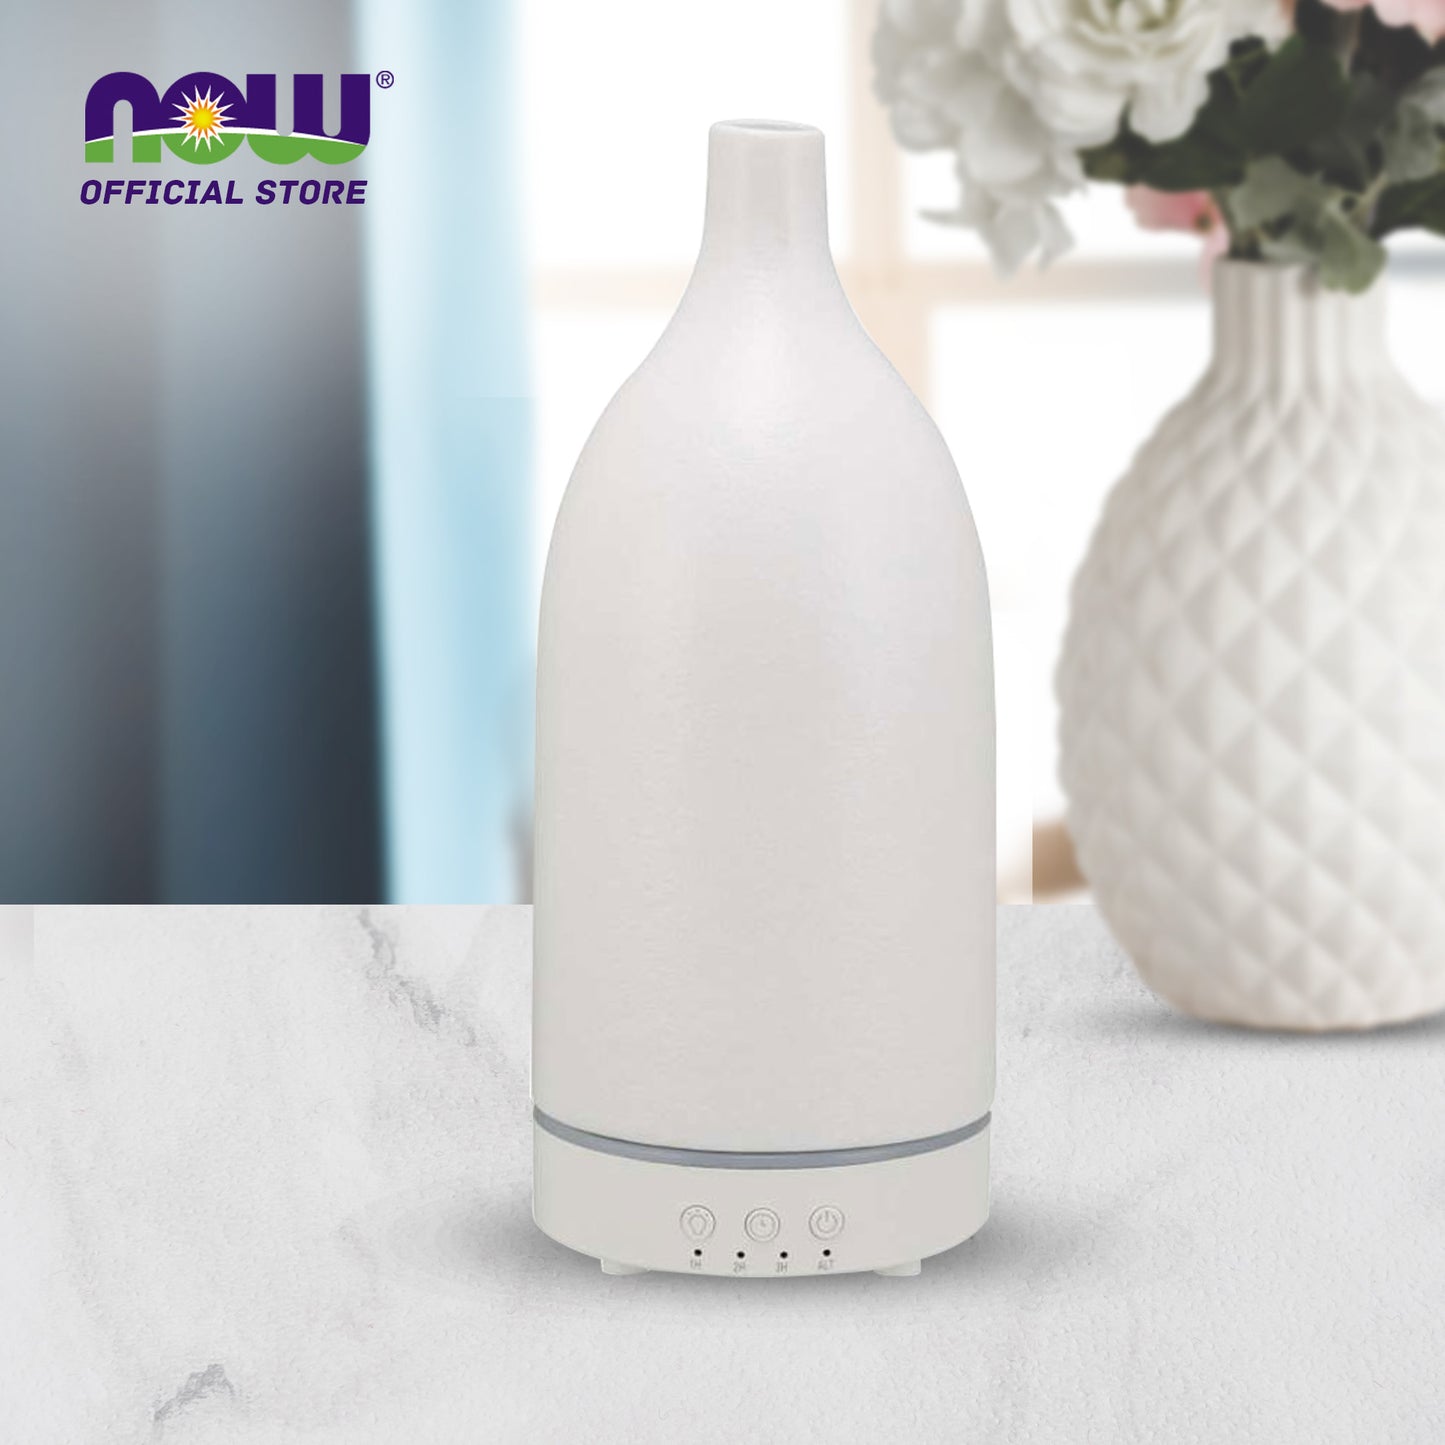 NOW Essential Oils, Ultrasonic Ceramic Stone Oil Diffuser, Extremely Quiet, Easy To Clean